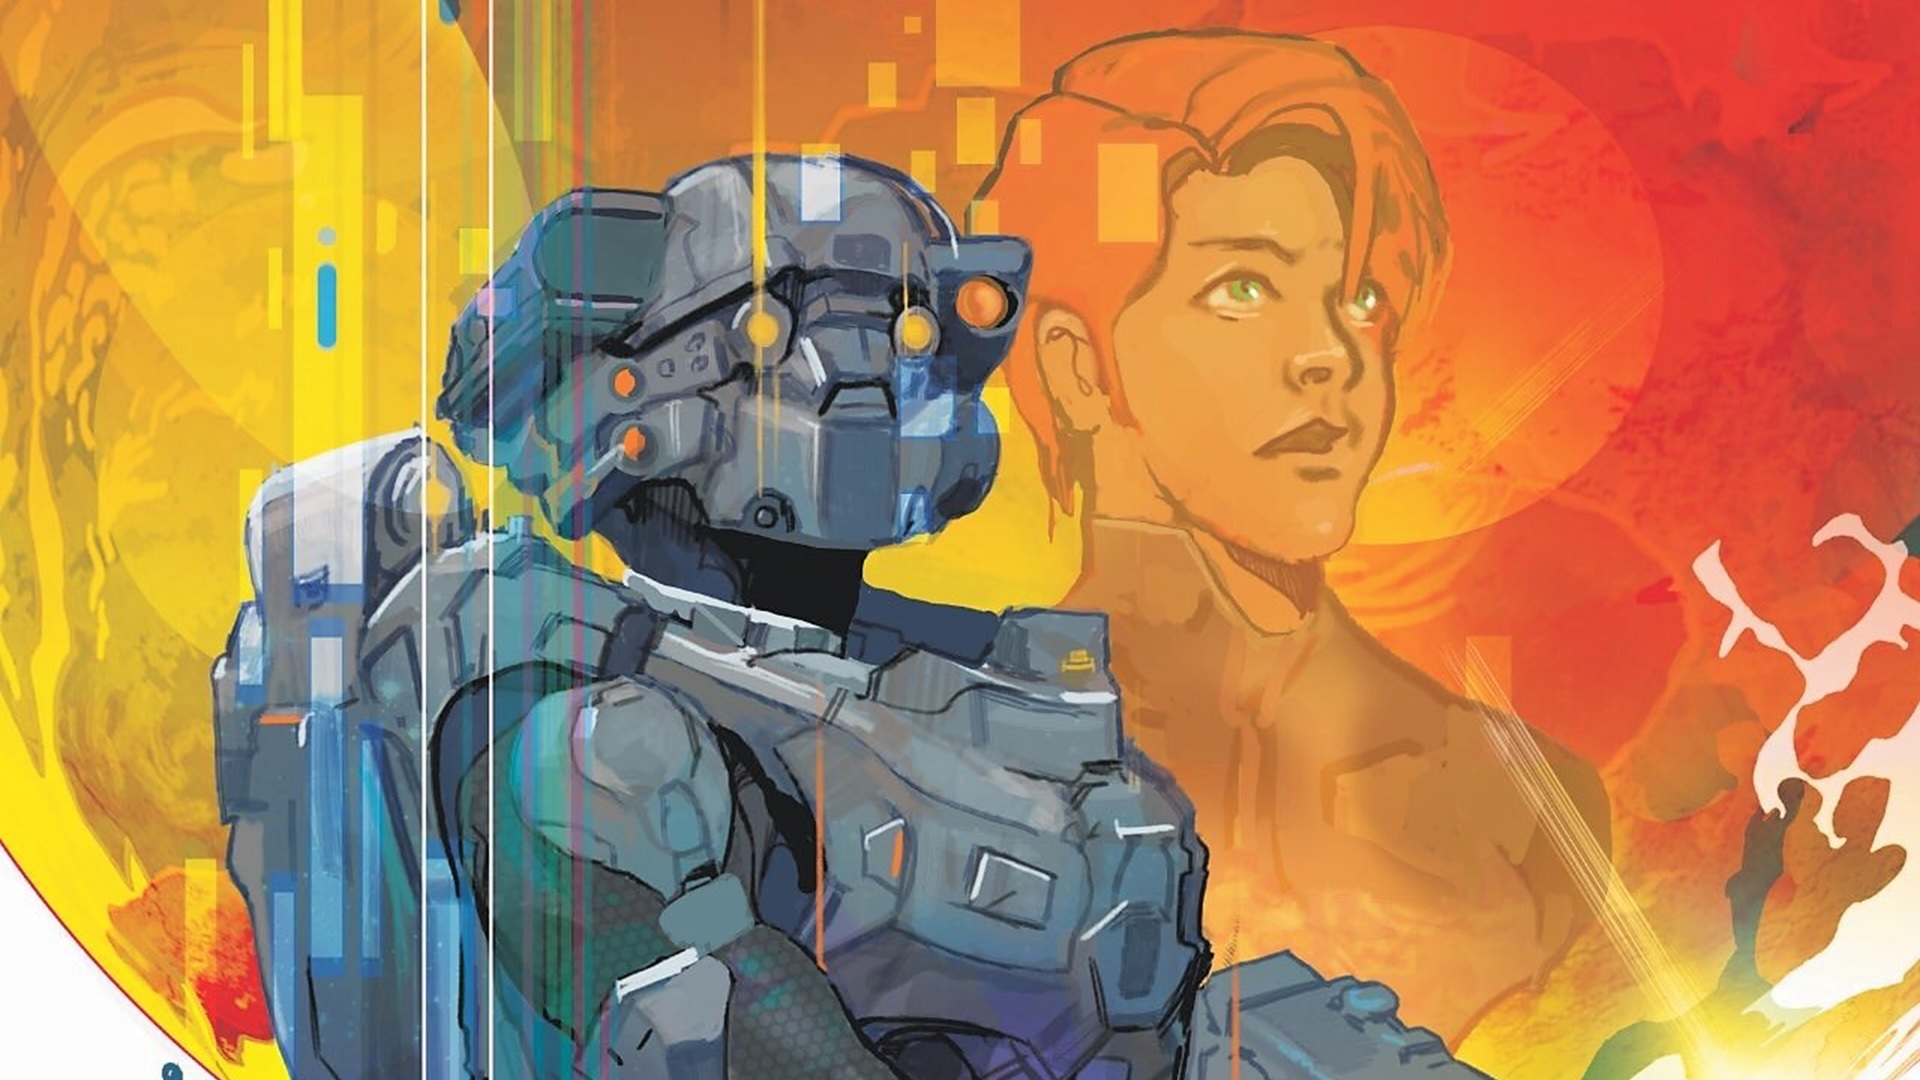 Cover art of Halo: Lone Wolf comic